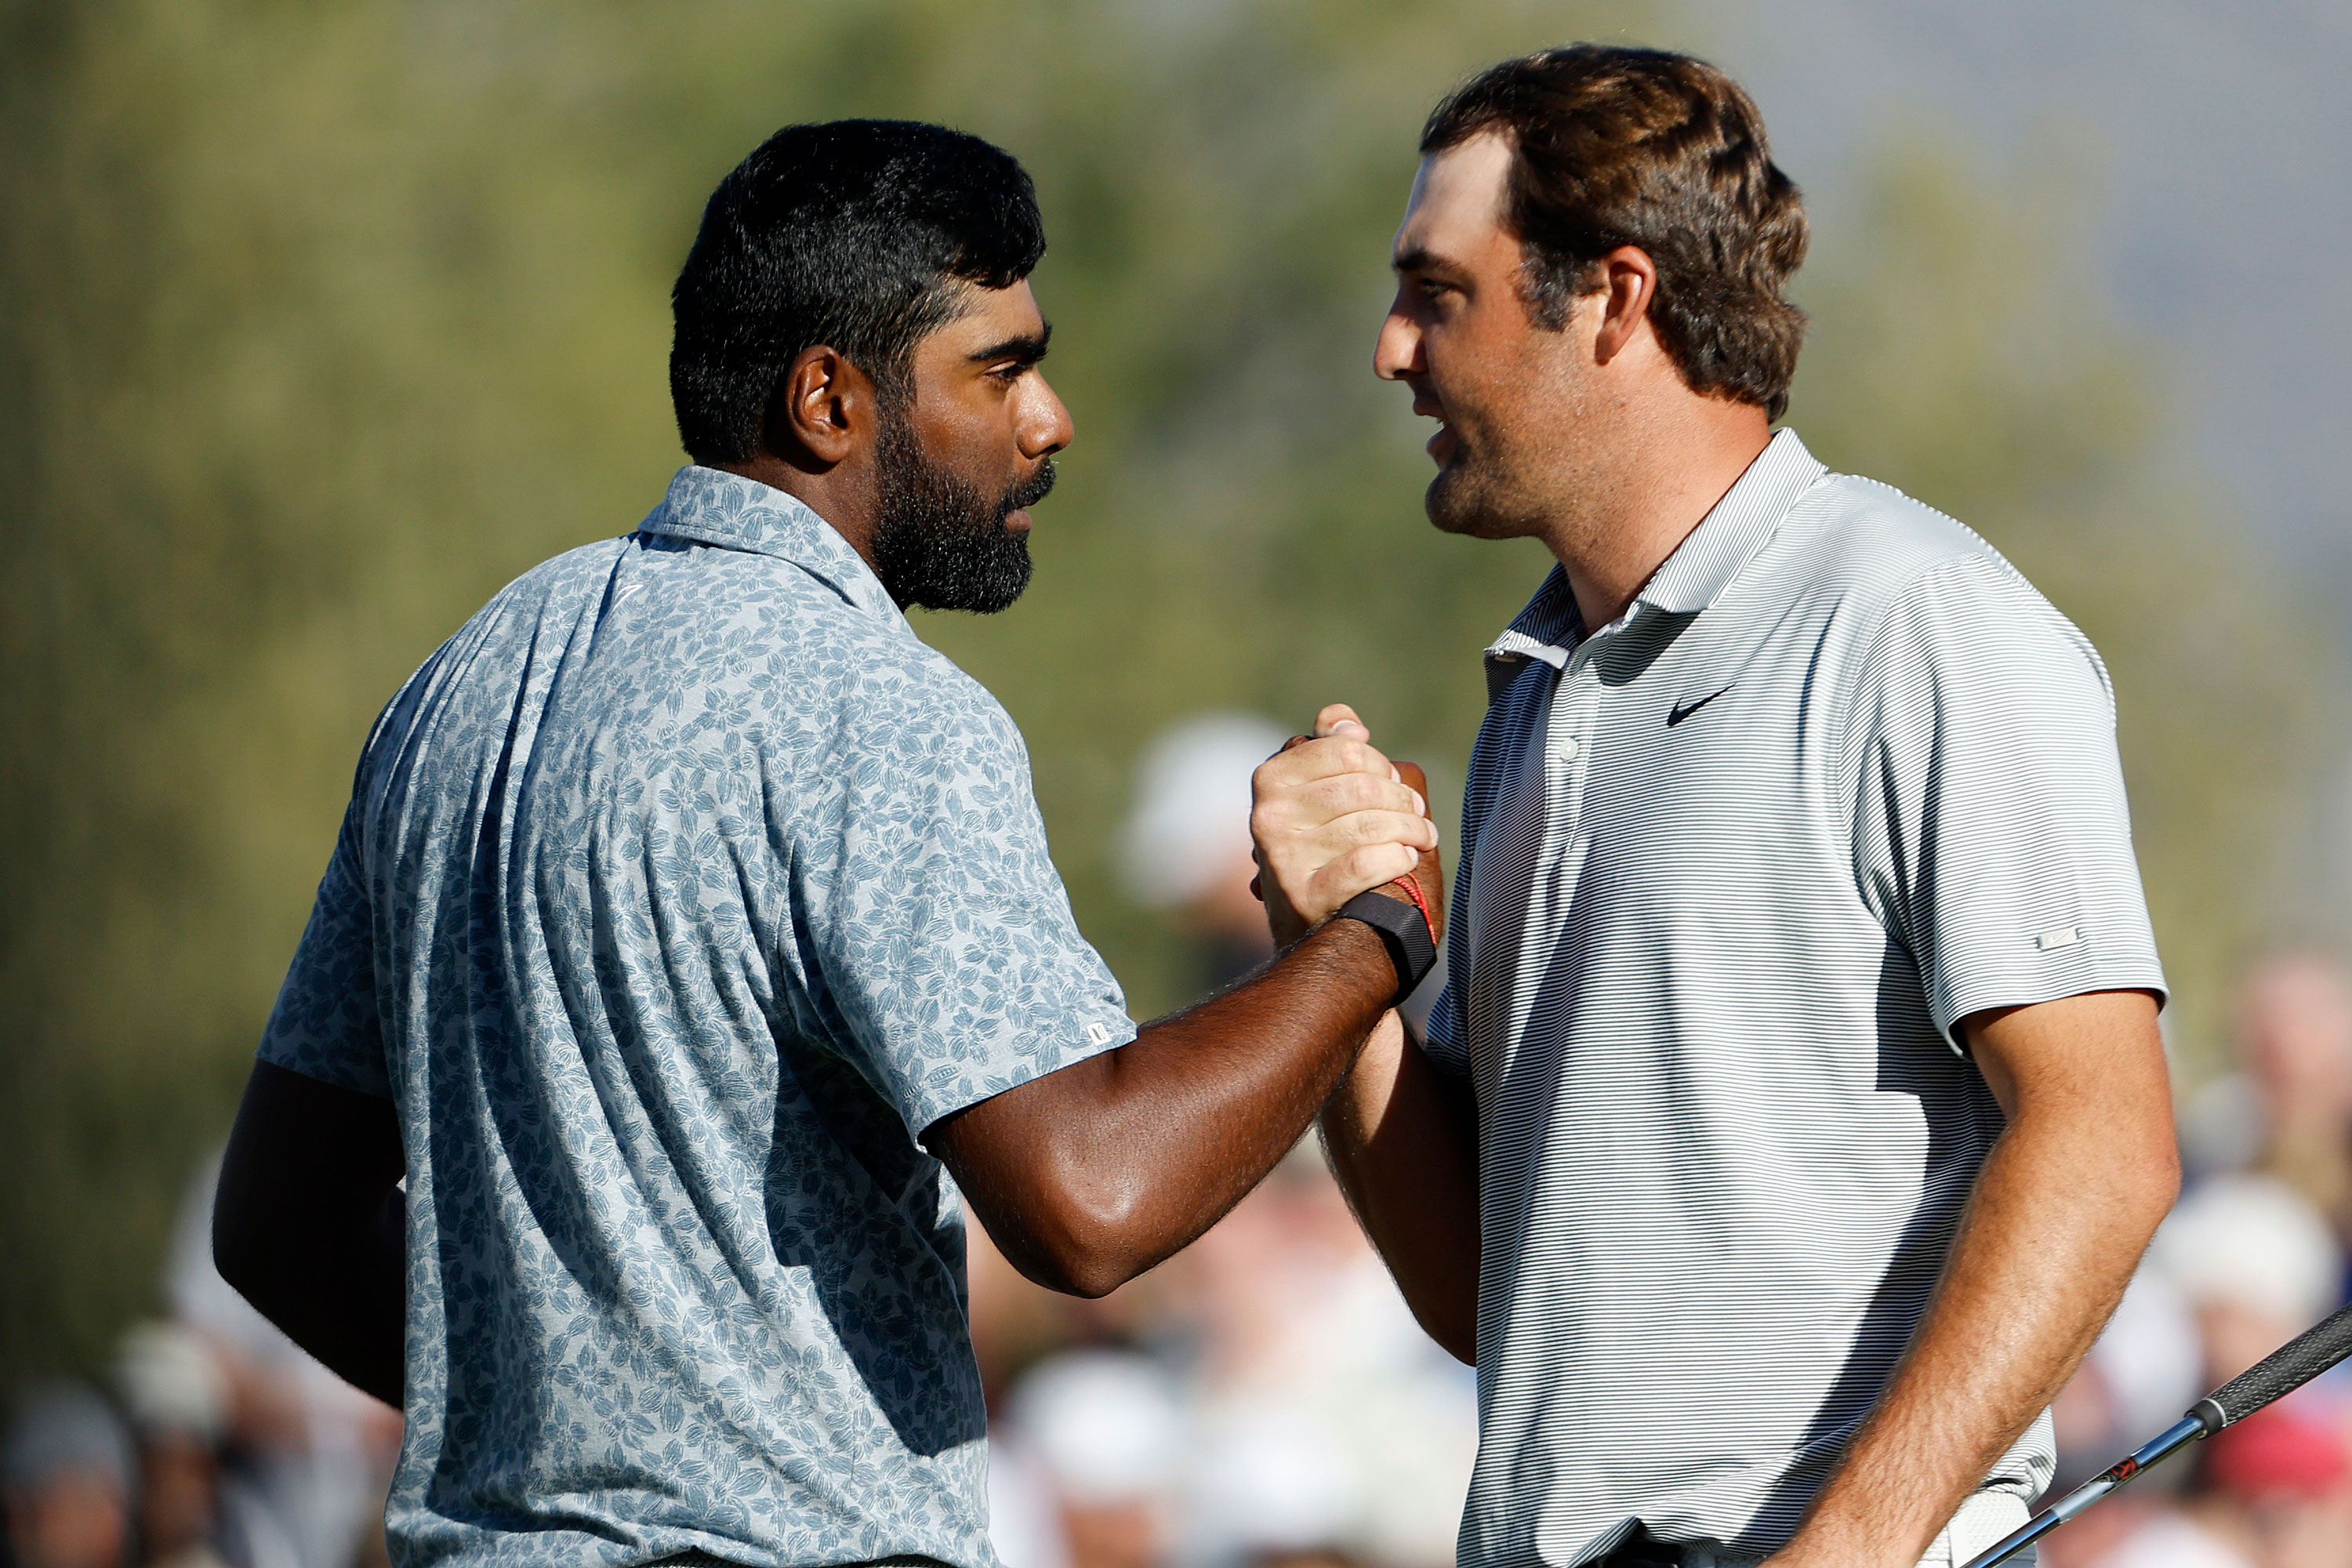 It's Not Official, But Super Bowl, Phoenix Open Final Round Likely